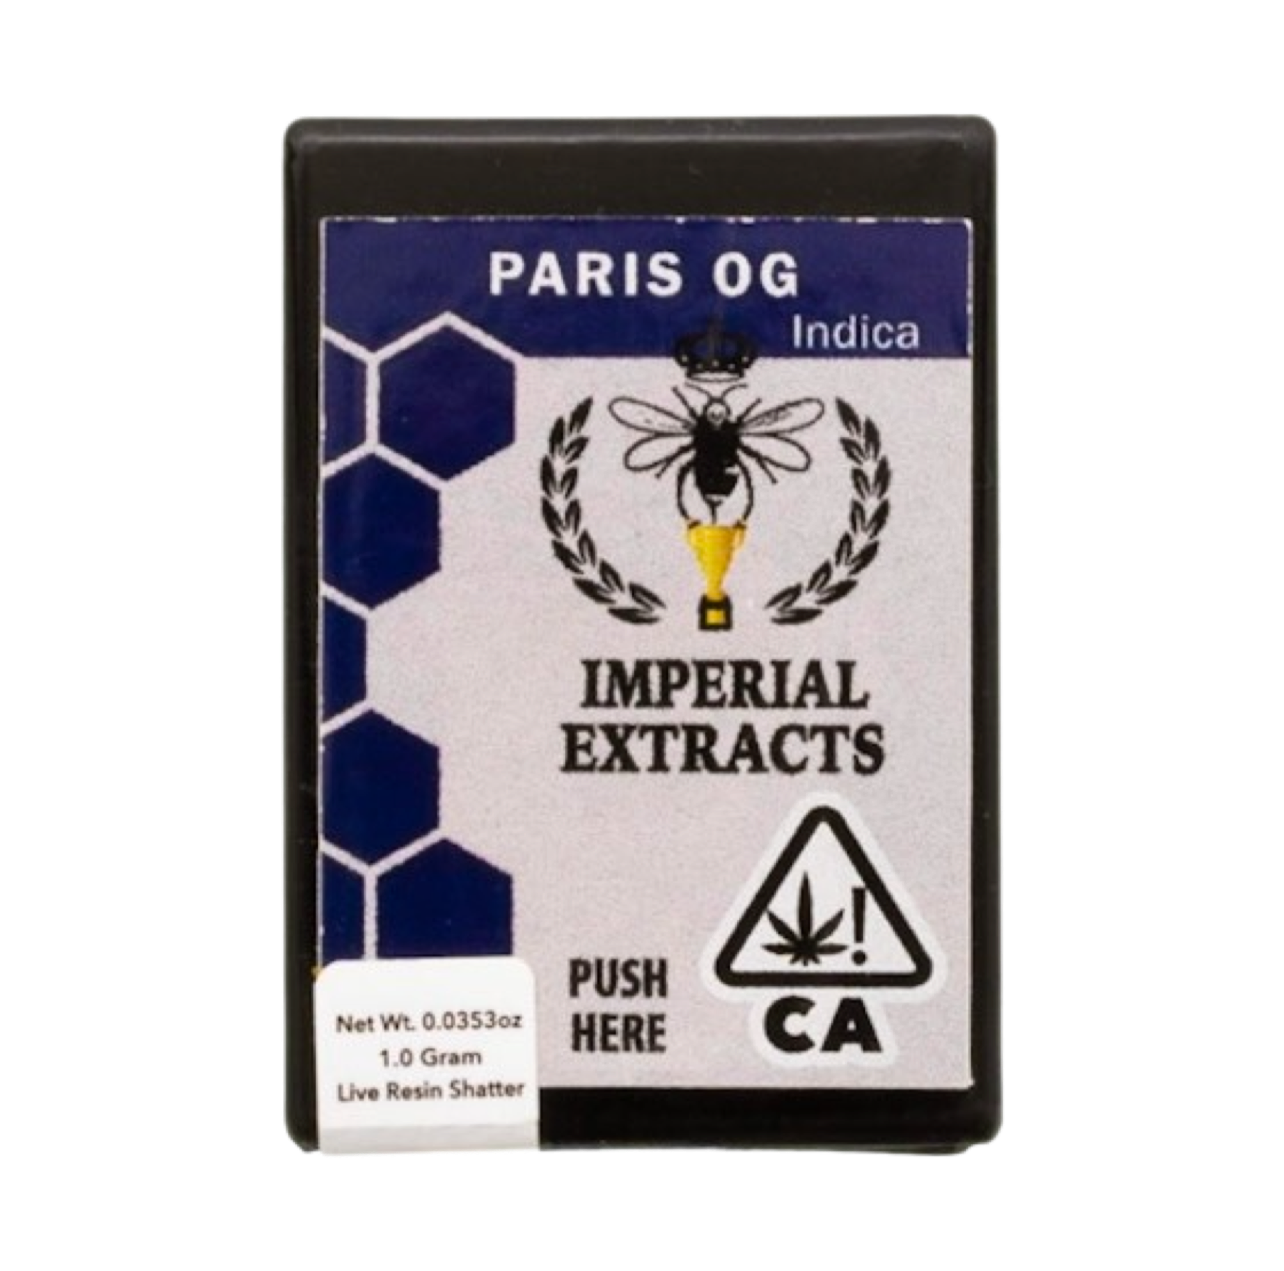 1 Gram Live Resin Shatter by Imperial Extracts | Paris Og | Indica